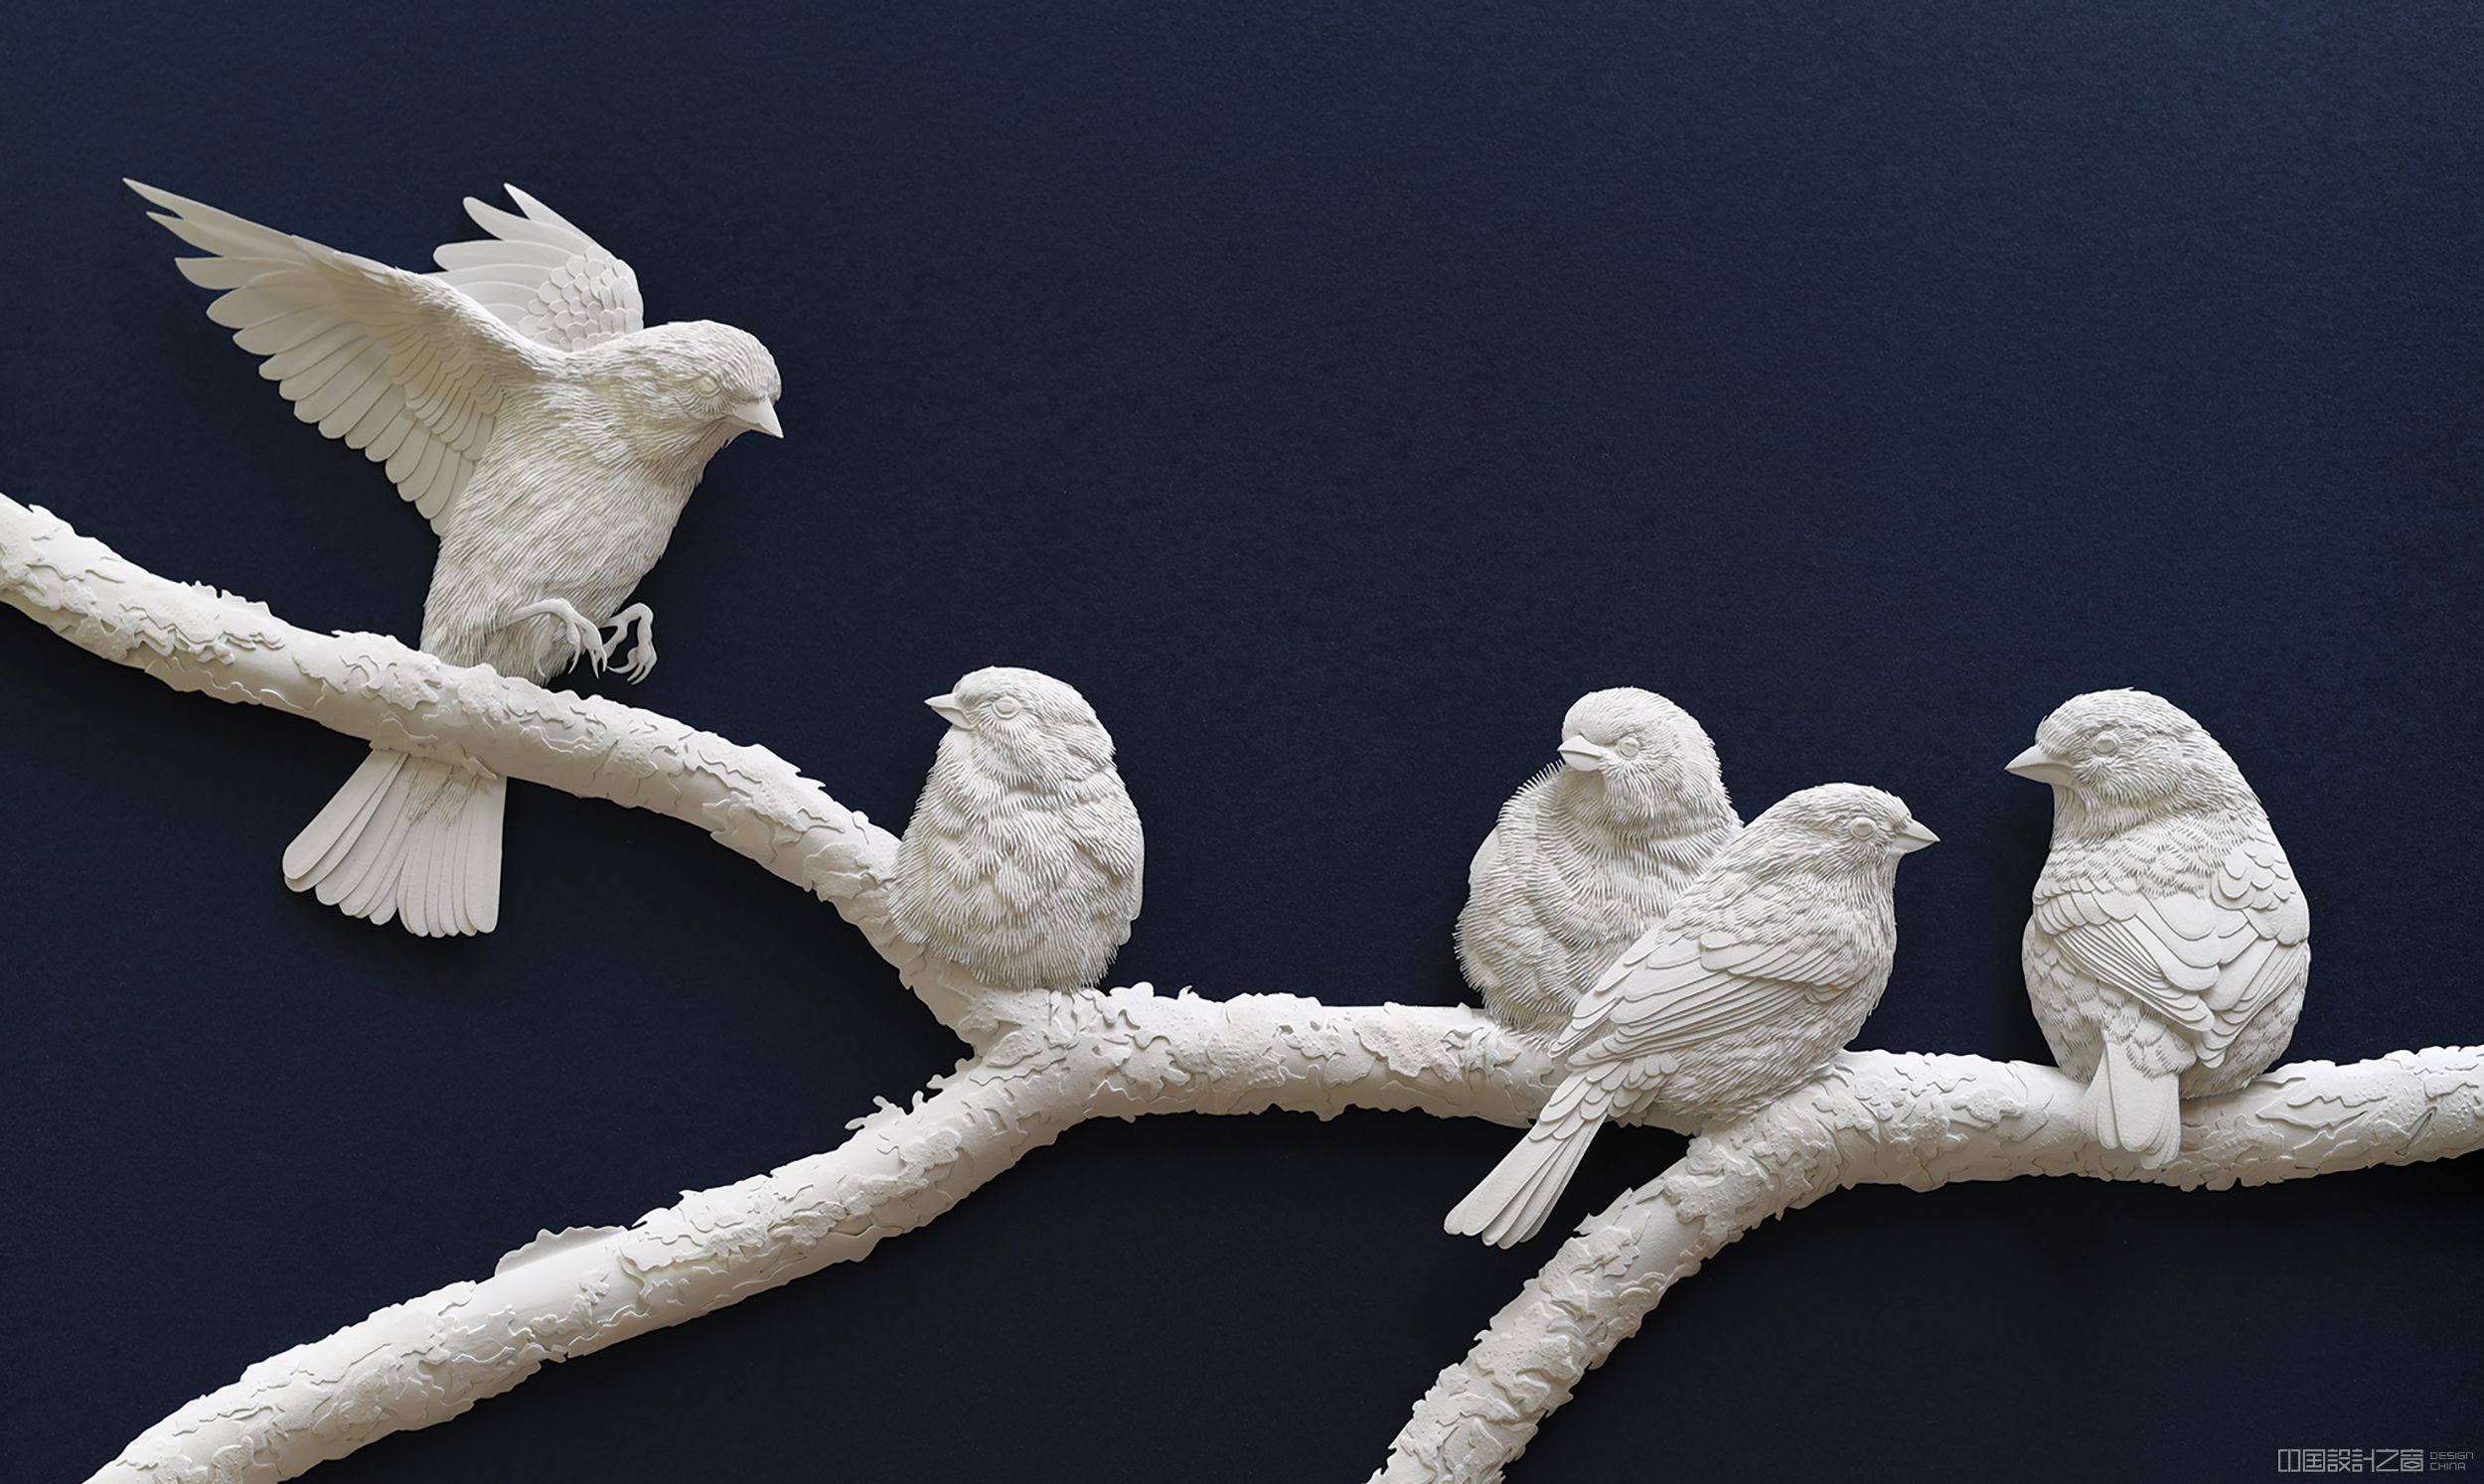 A sculpture of birds on a branch made from paper.